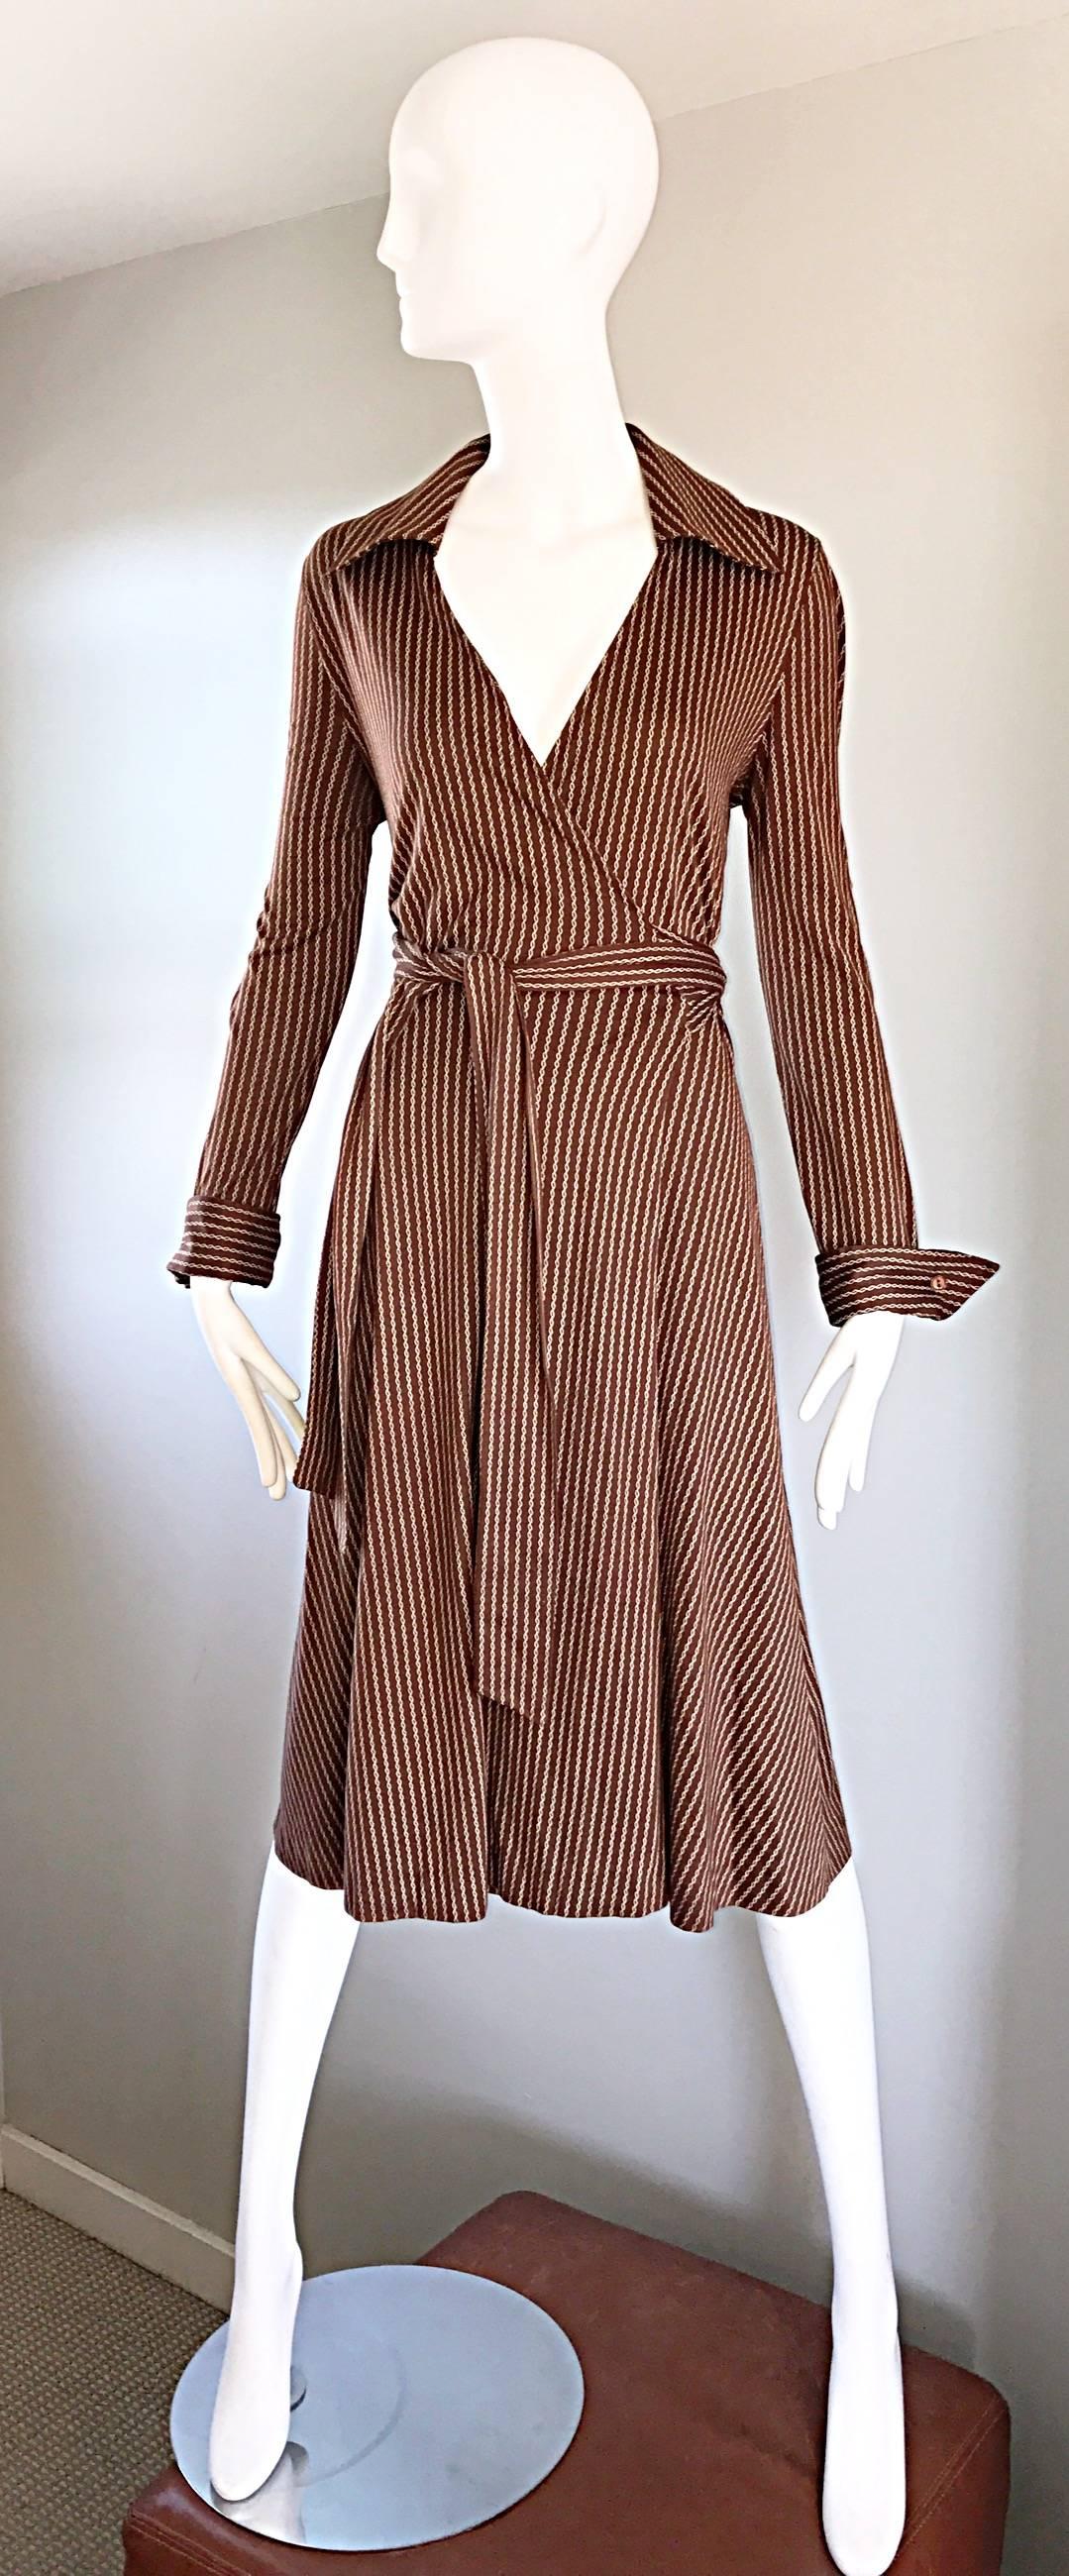 Insanely chic and rare 1970s DIANE VON FURSTENBERG (Made in Italy) brown and ivory chain striped long sleeve wrap shirt dress! Early DVF piece in the style that put the infamous designer on the map. Flattering tailored bodice, with a full skirt.